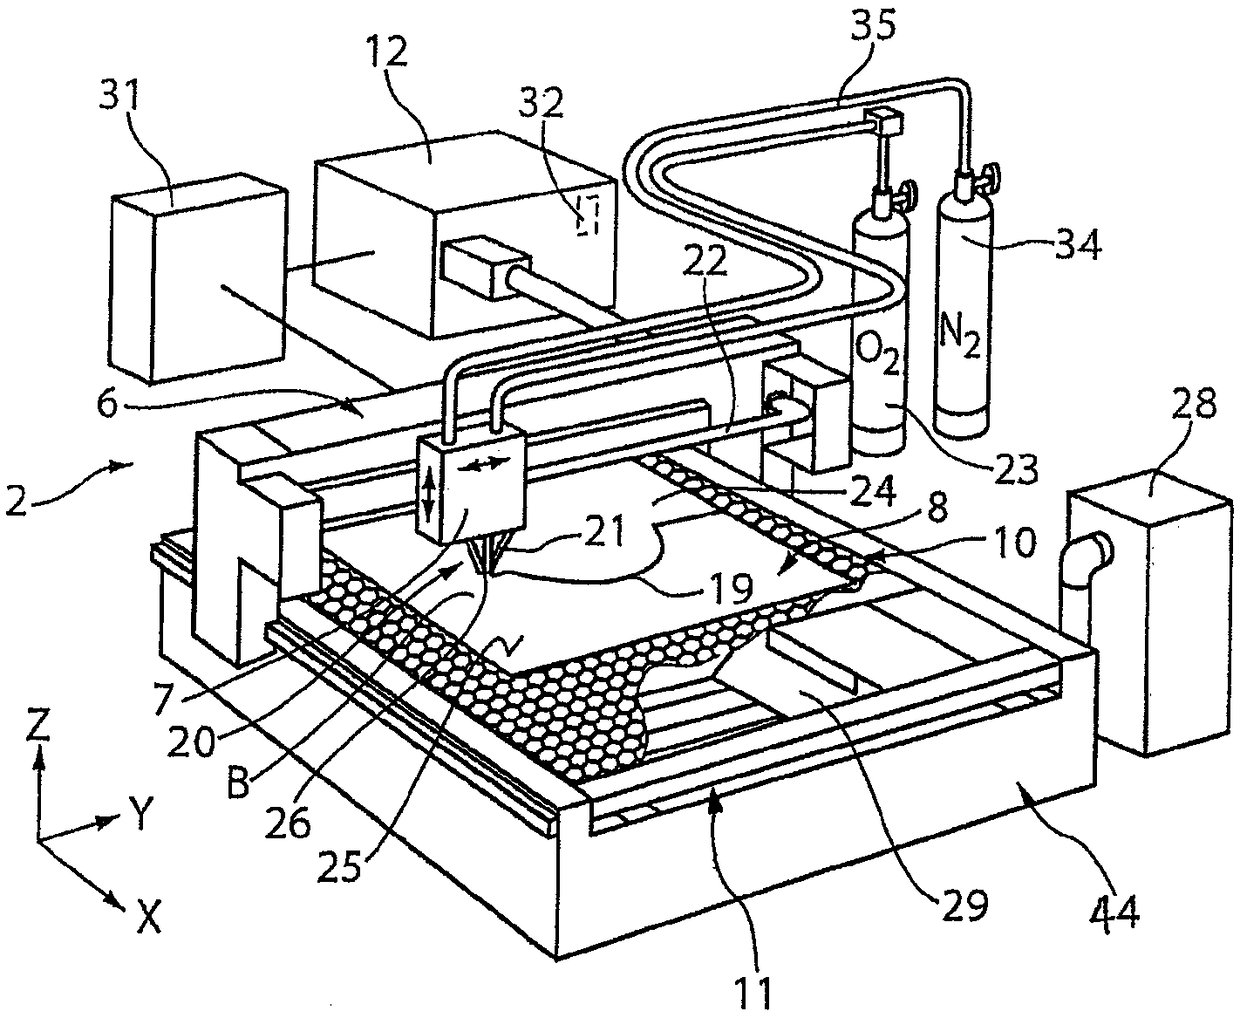 Method for the cutting processing of a panel-type material in a machine, and a machine for the cutting processing of the panel-type material, in particular for carrying out the method